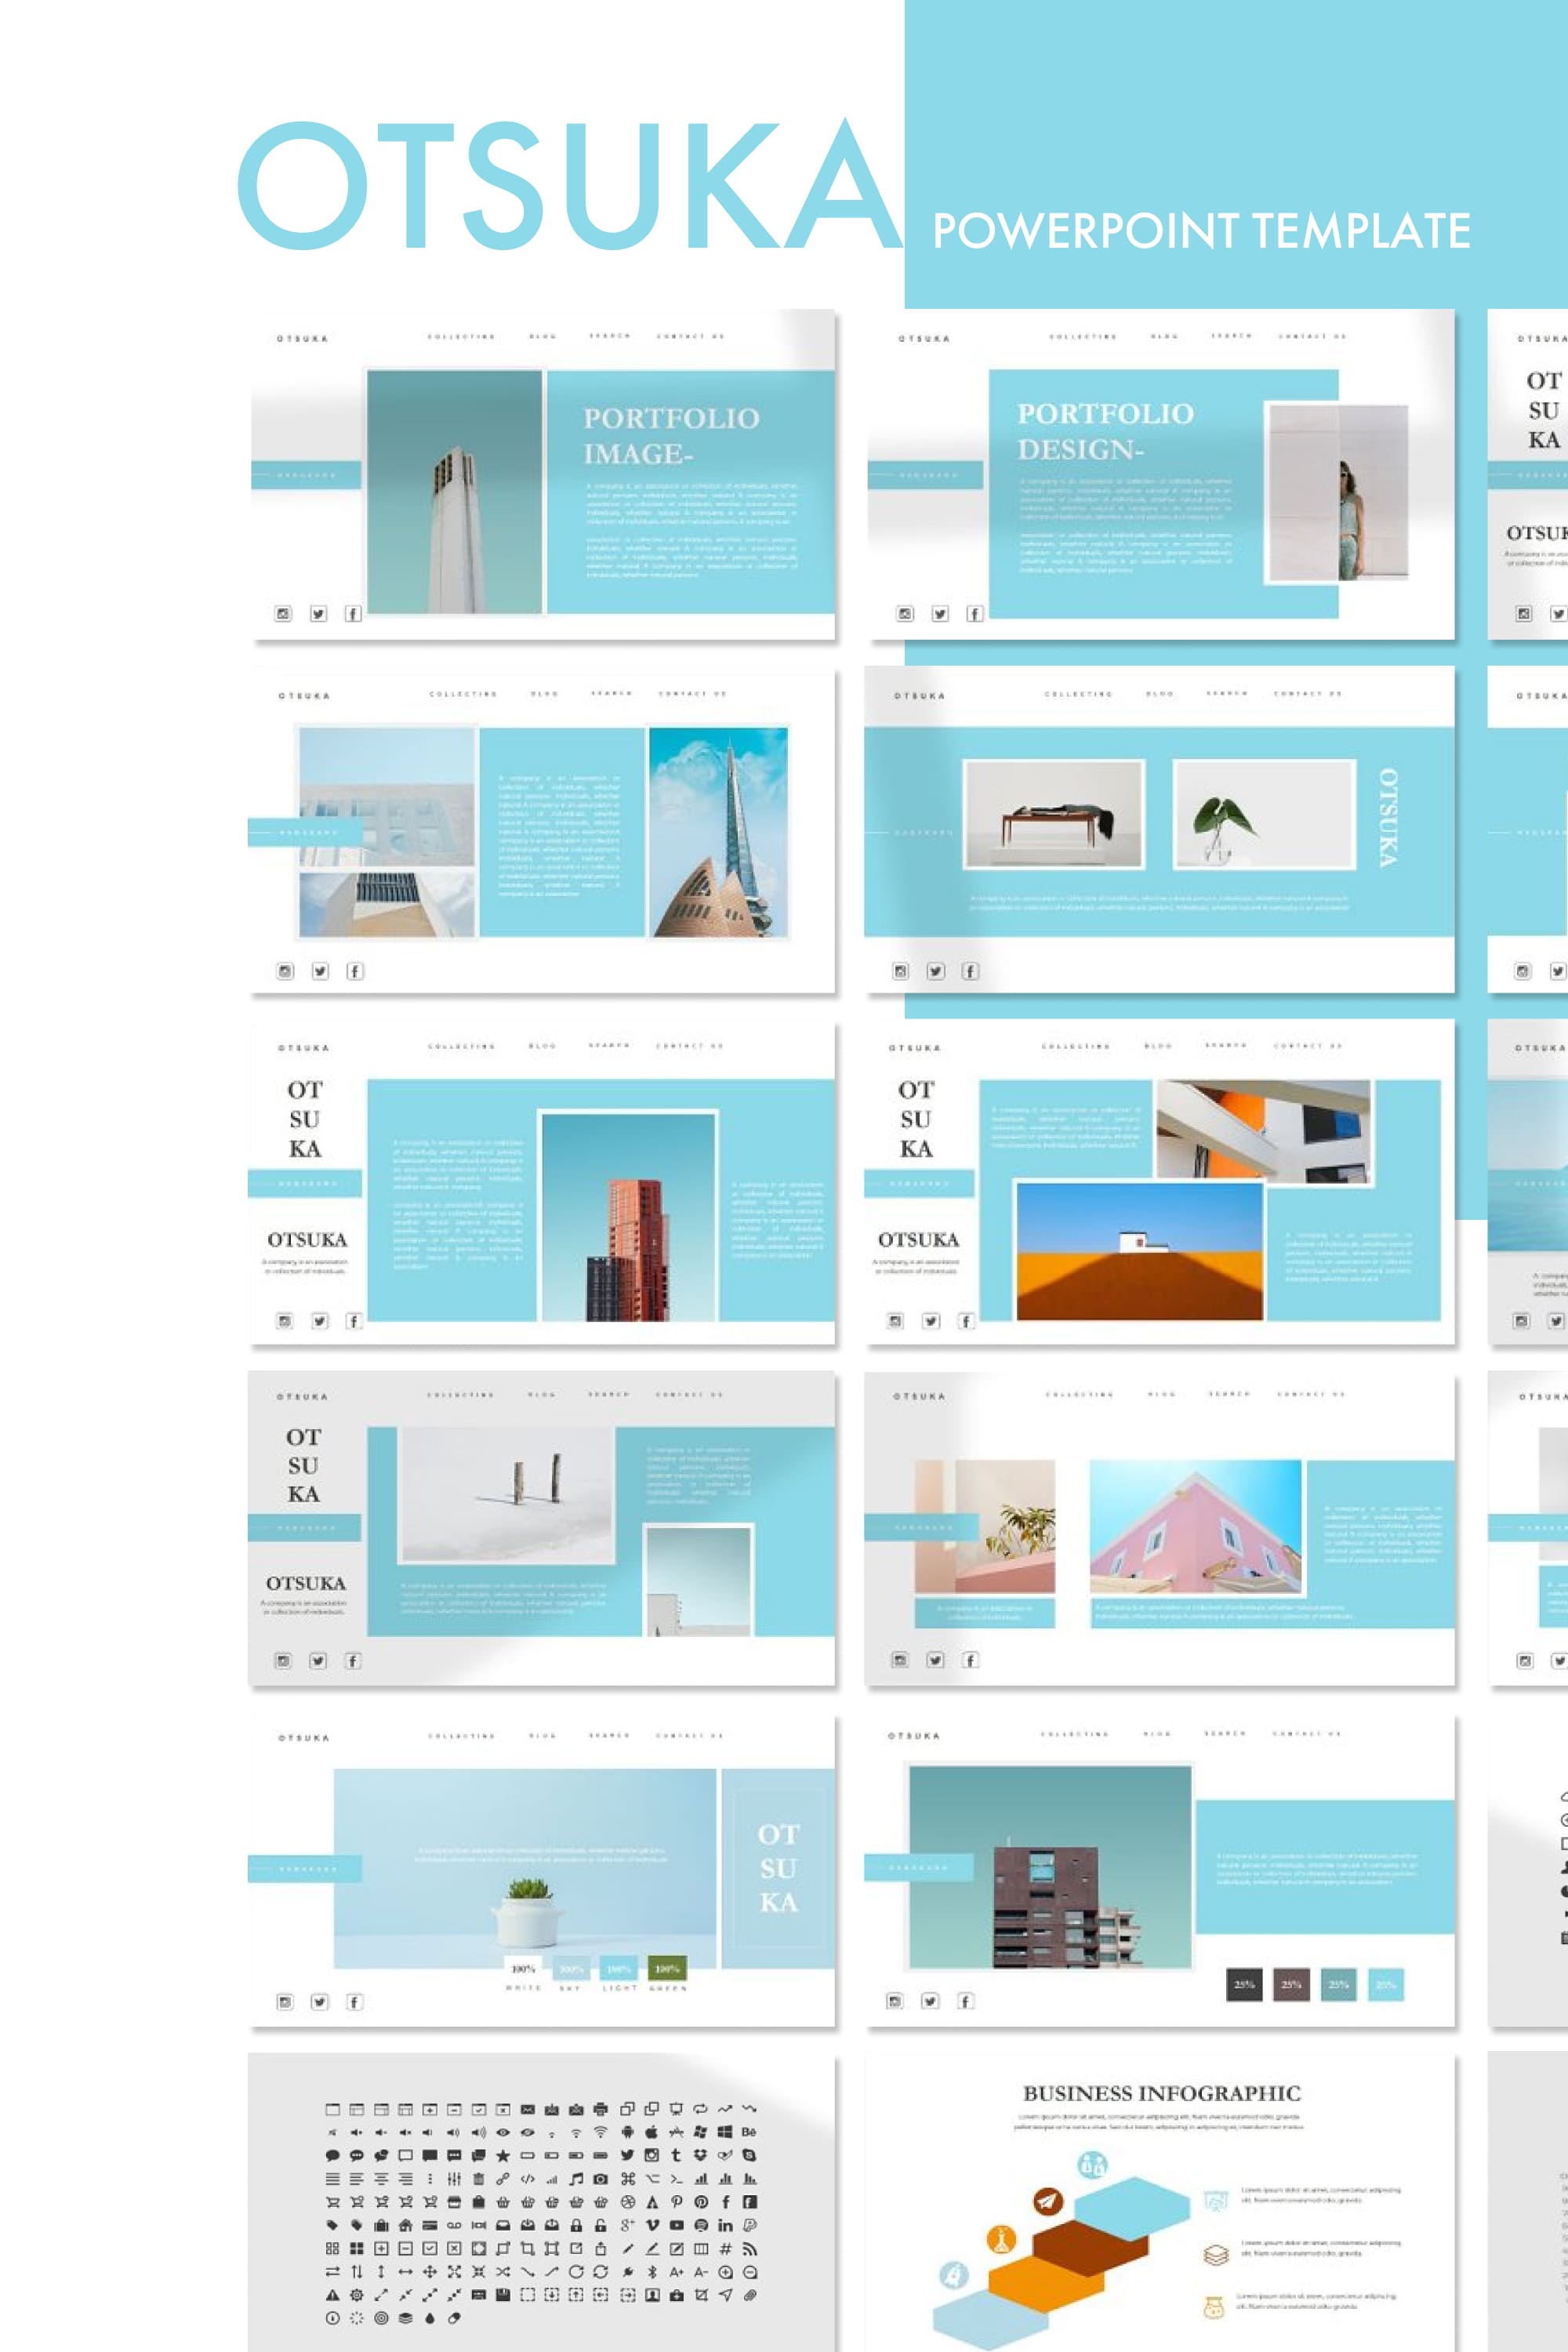 Otsuka powerpoint template - pinterest image preview.